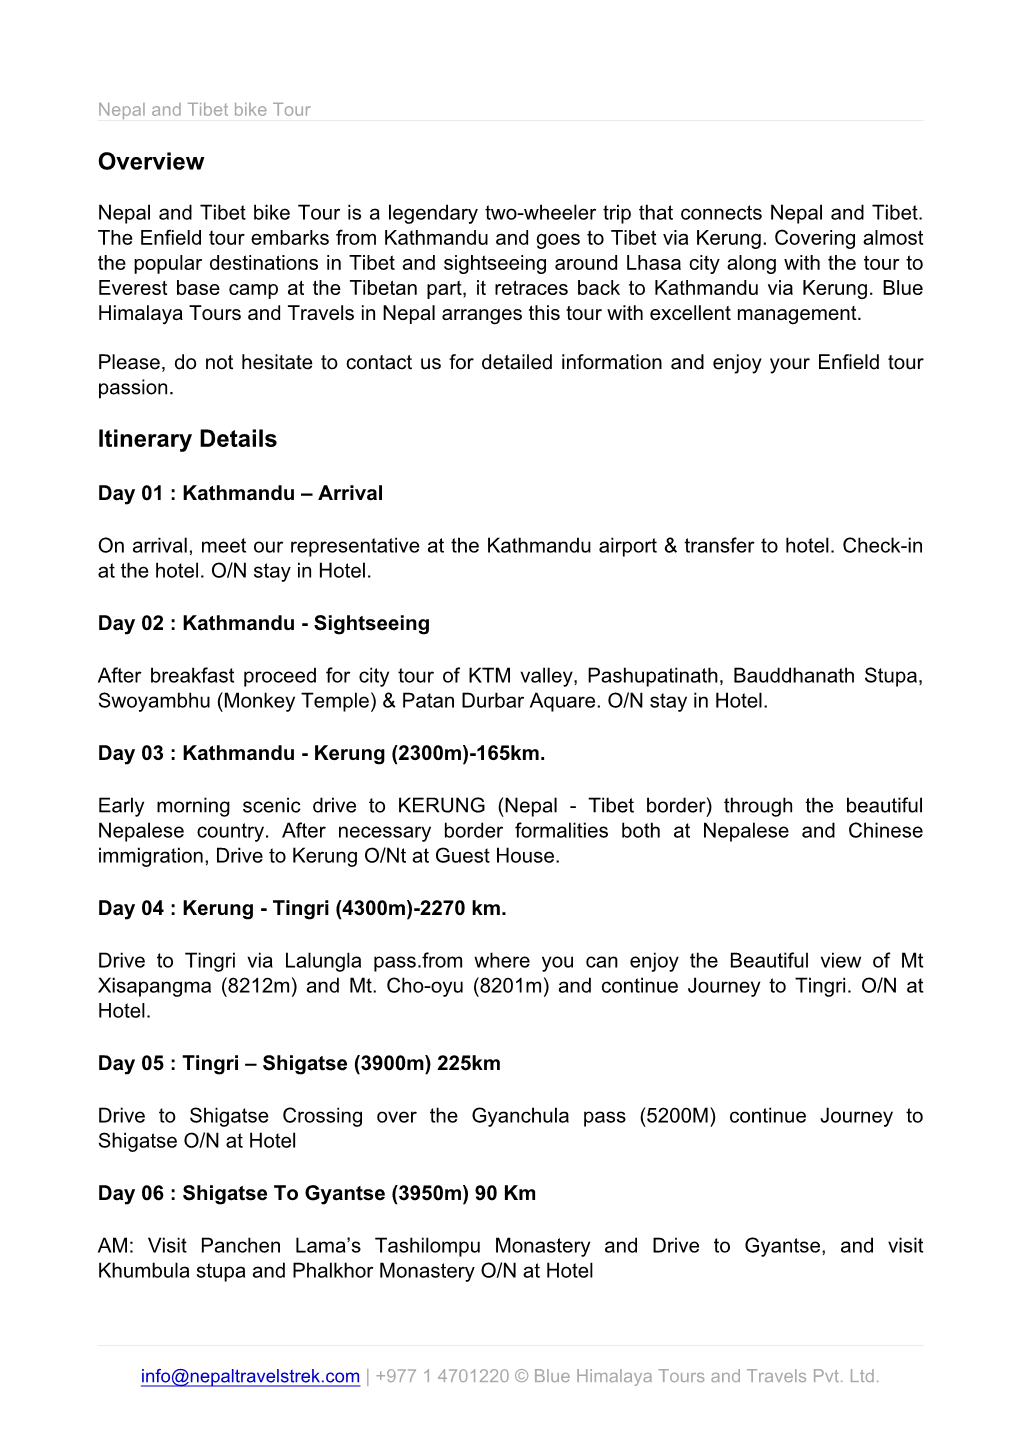 Overview Itinerary Details